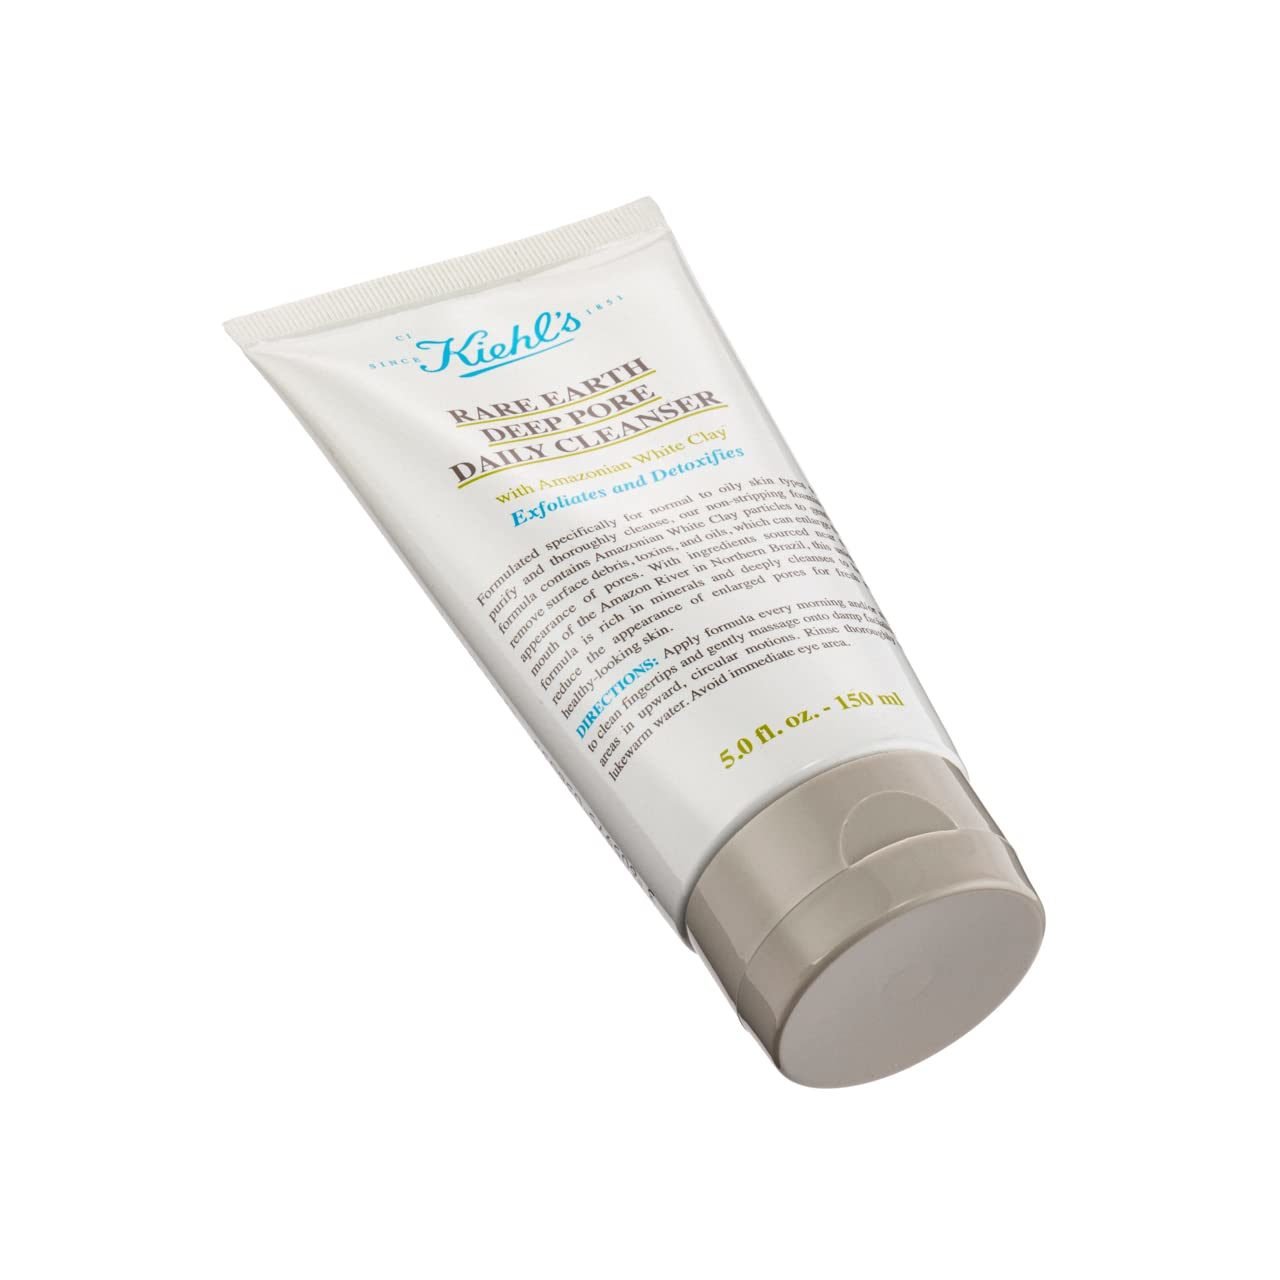 Kiehl's by Kiehl's Rare Earth Deep Pore Daily Cleanser --150ml/5oz 3P's Inclusive Beauty